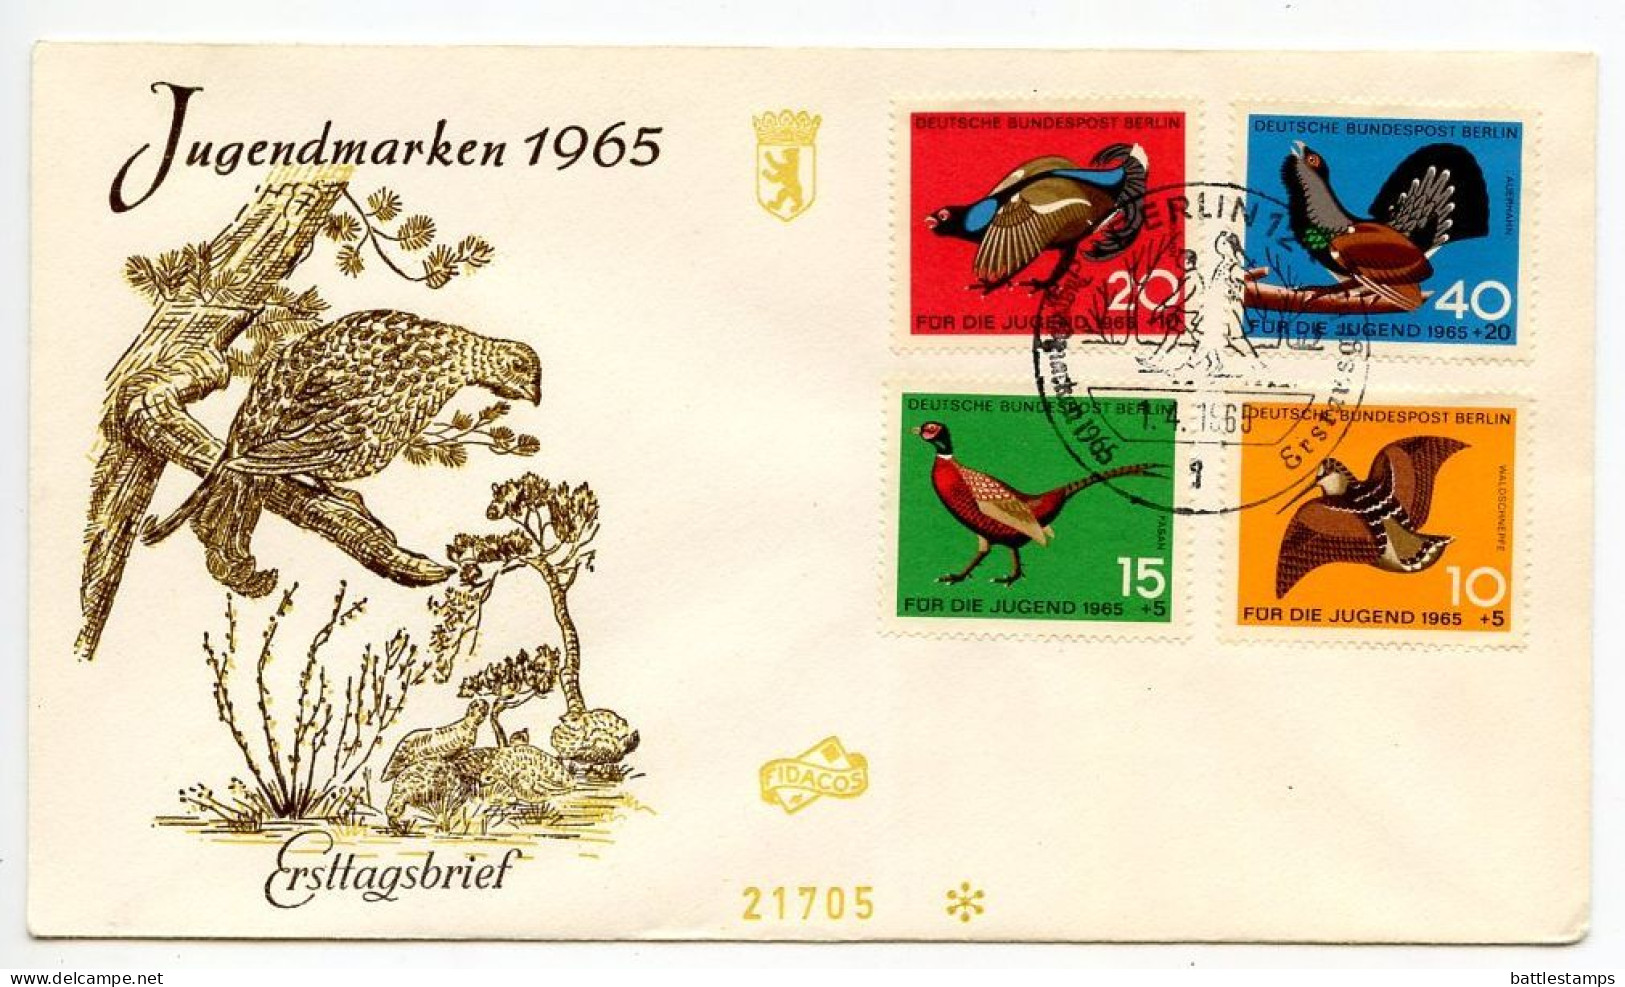 Germany, Berlin 1965 FDC Scott 9NB29-9NB32 Birds - Woodcock, Ring-necked Pheasant, Black Grouse, Capercaillie - 1948-1970